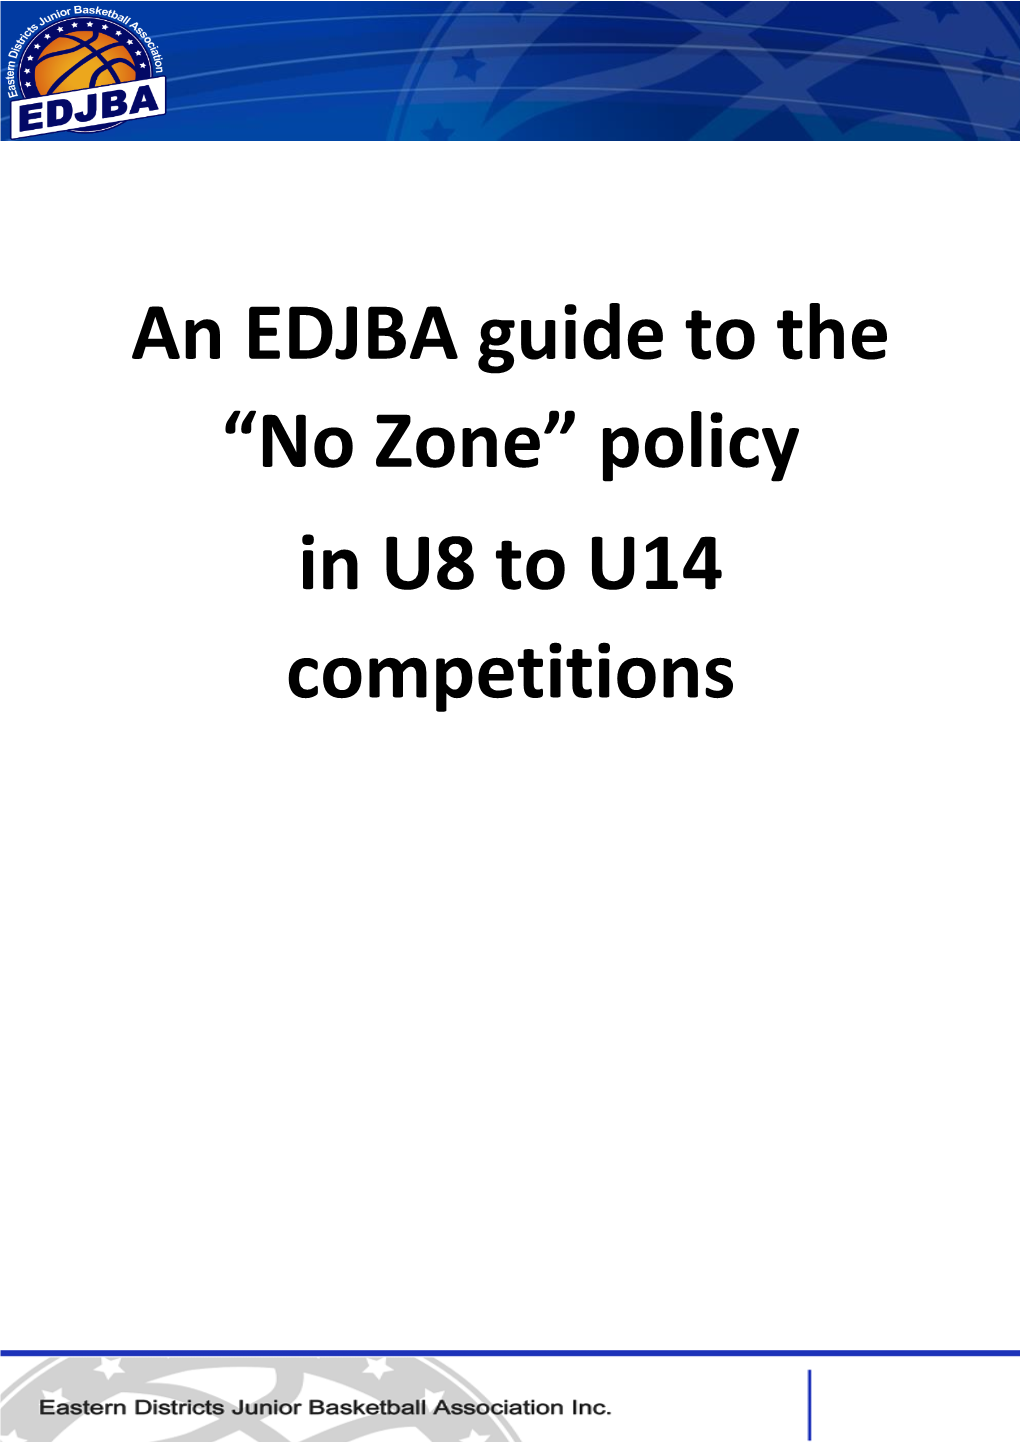 An EDJBA Guide to the “No Zone” Policy in U8 to U14 Competitions